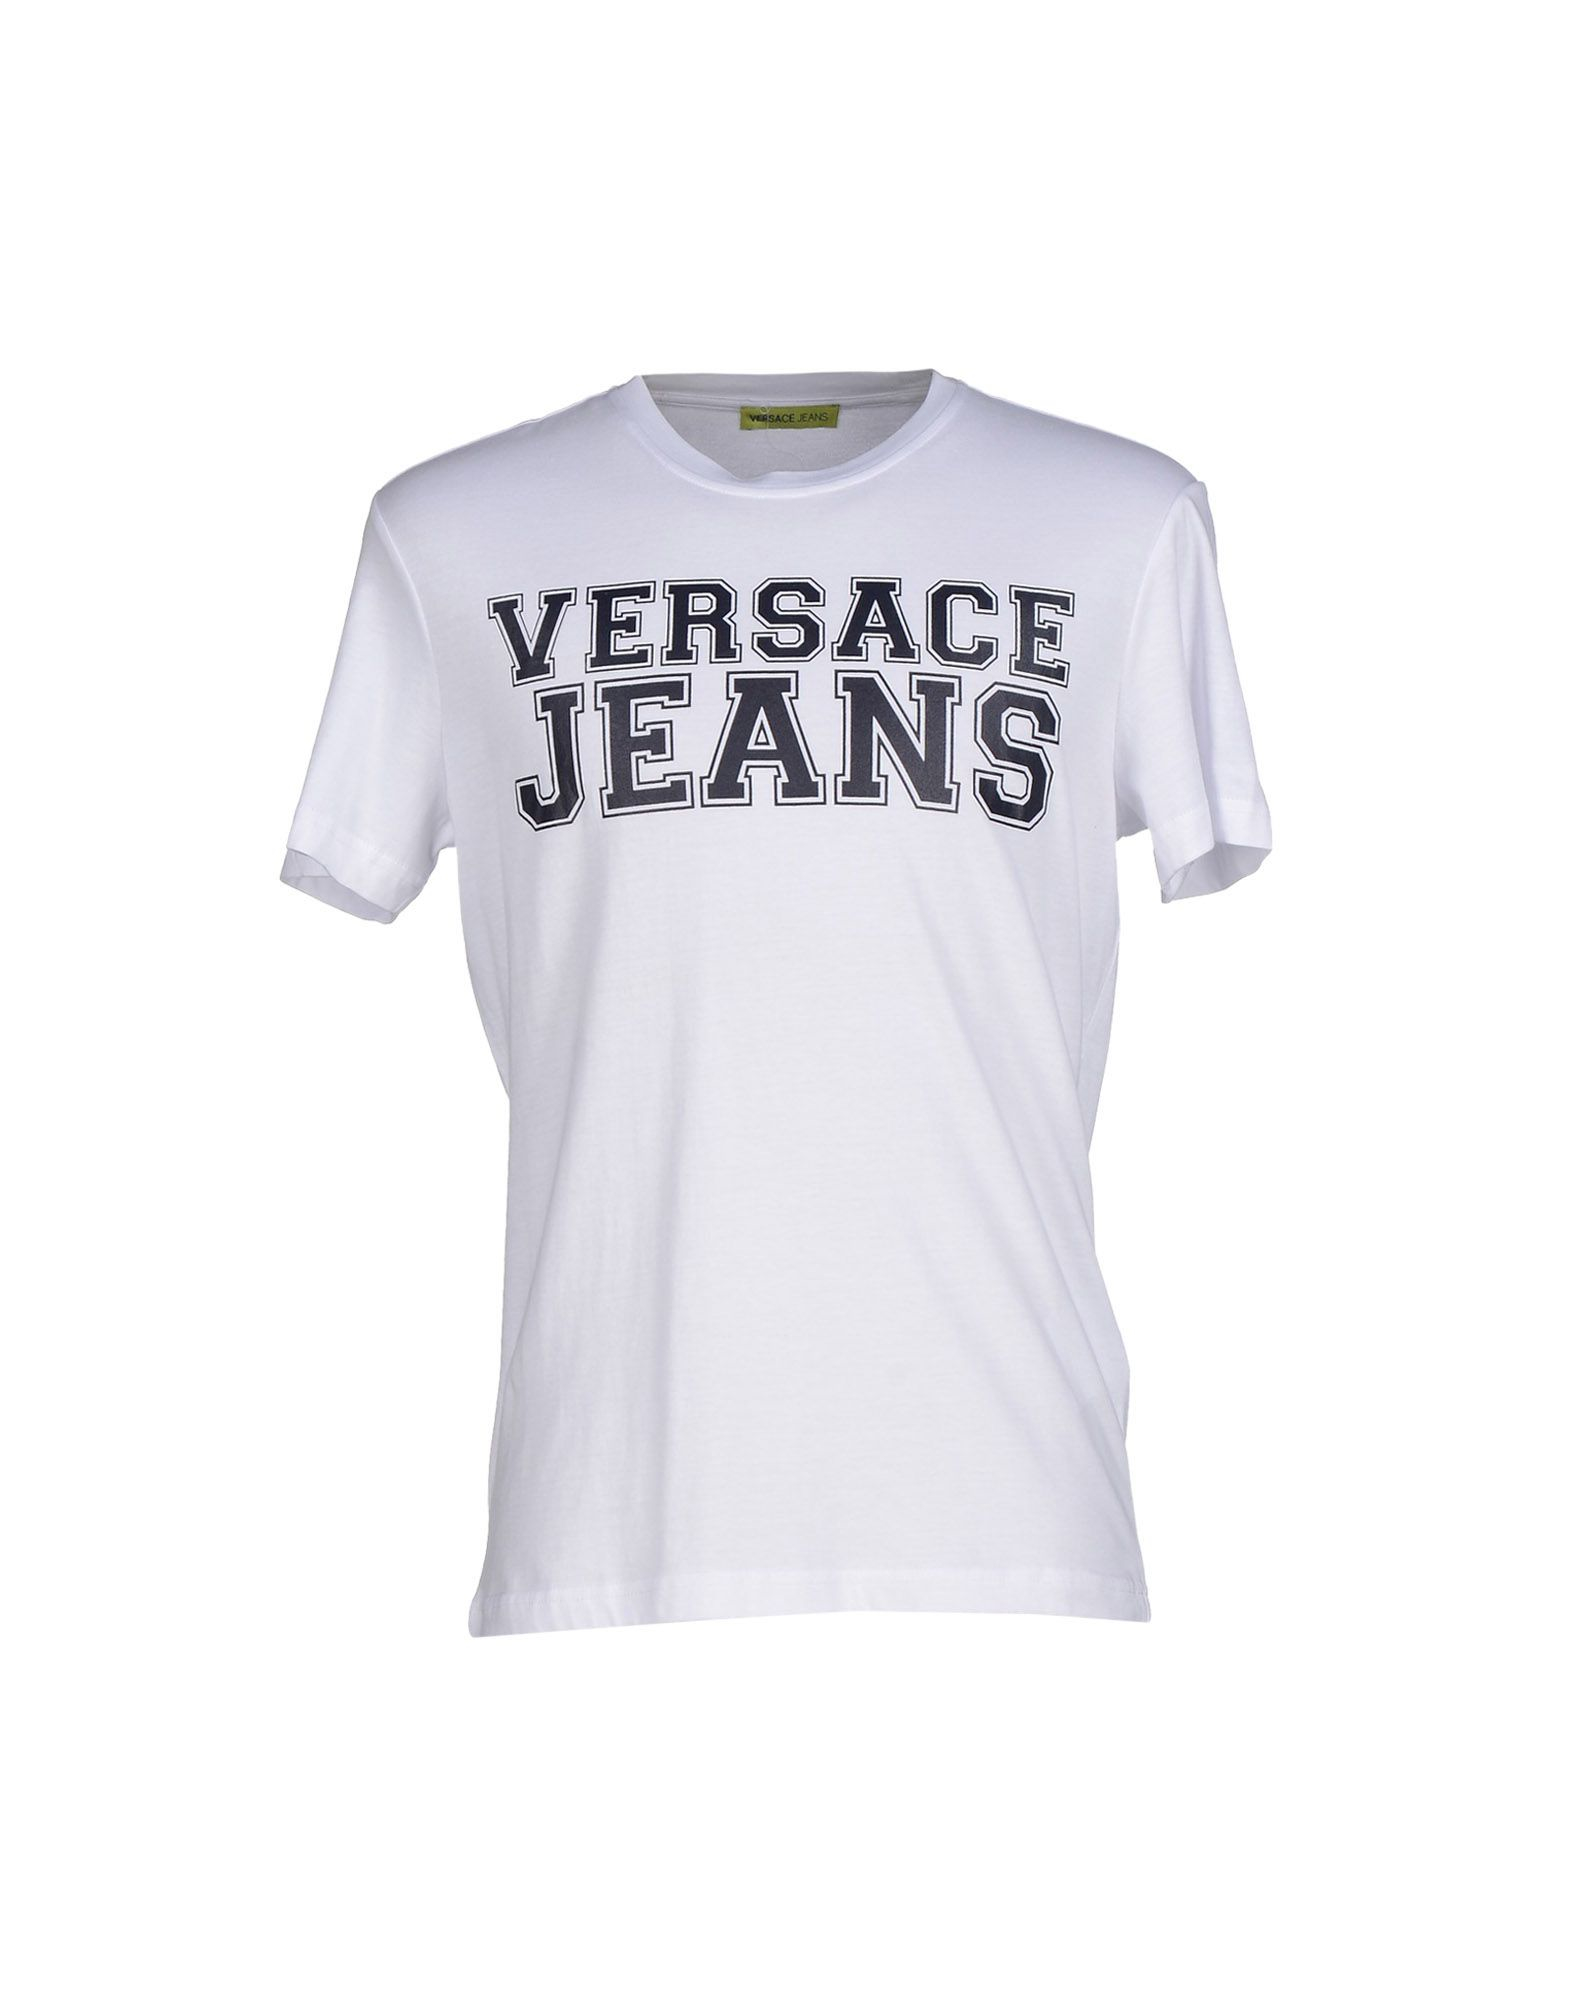 Lyst - Versace Jeans T-shirt in White for Men